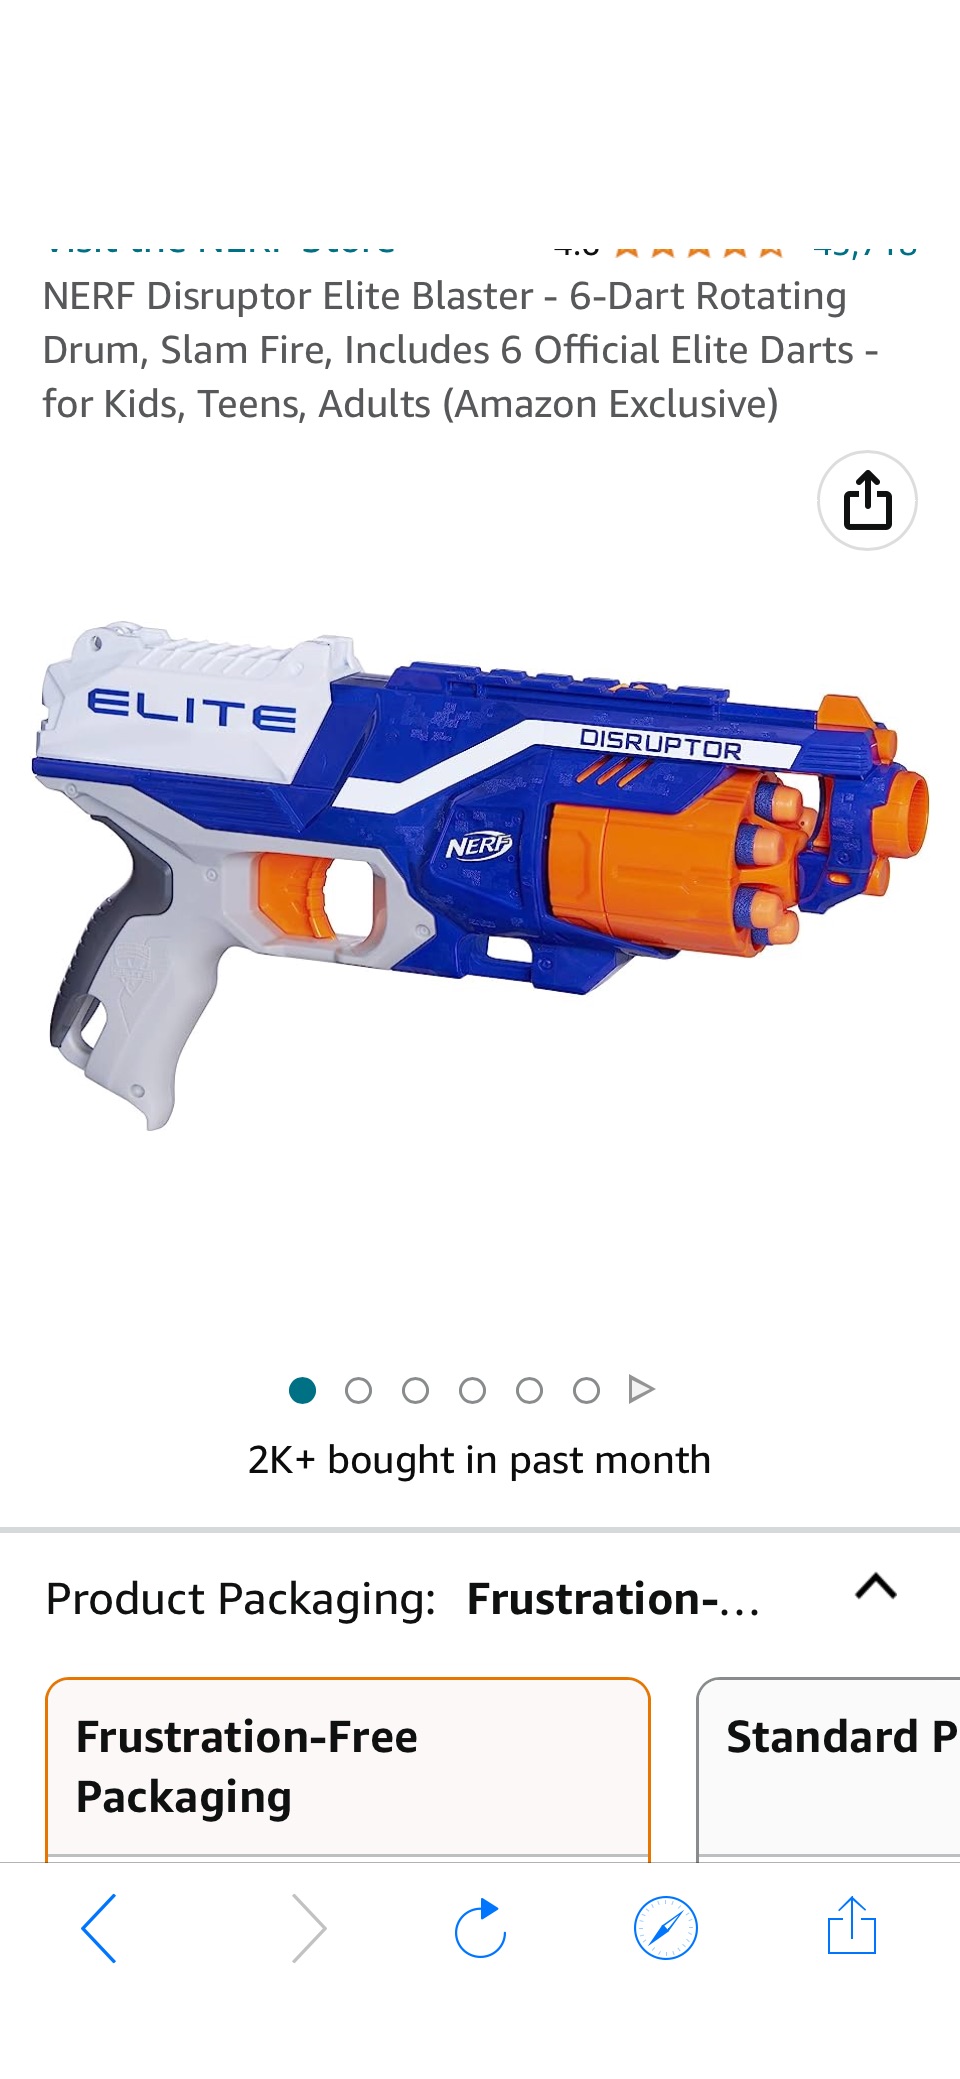 Amazon.com: NERF Disruptor Elite Blaster - 6-Dart Rotating Drum, Slam Fire, Includes 6 Official Elite Darts - for Kids, Teens, Adults (Amazon Exclusive)原价14.99